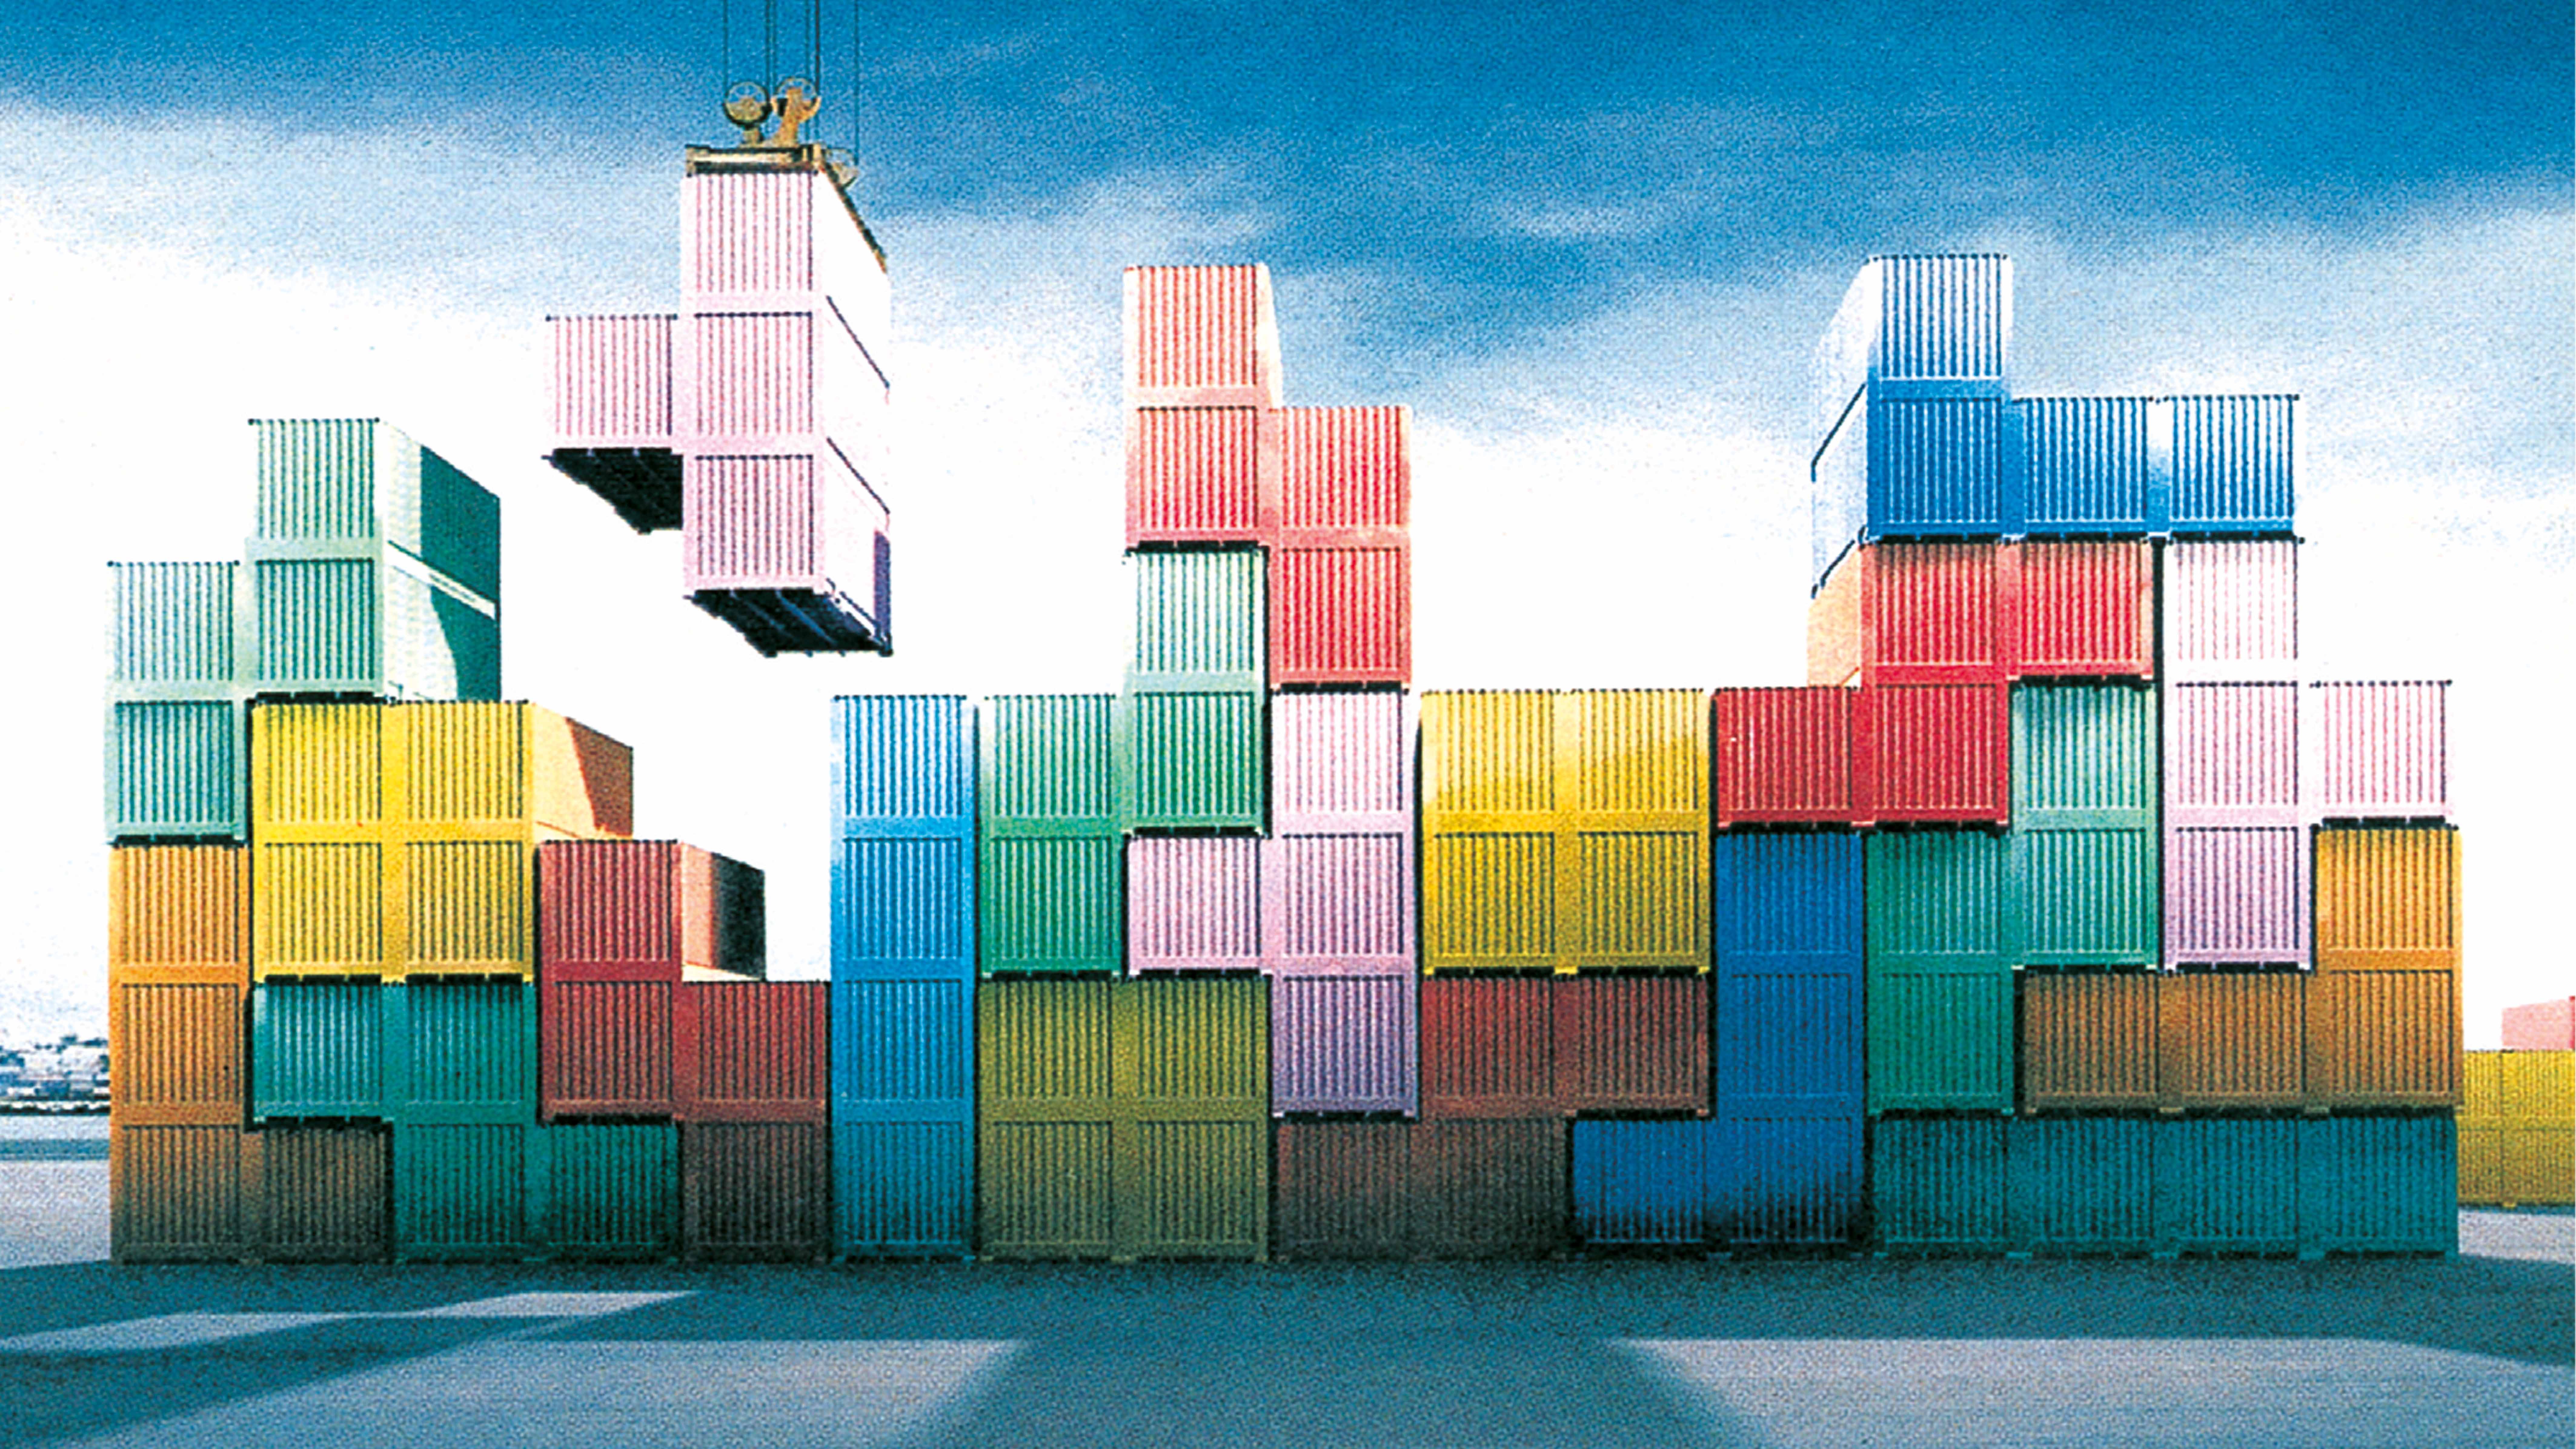 Containers Adrift